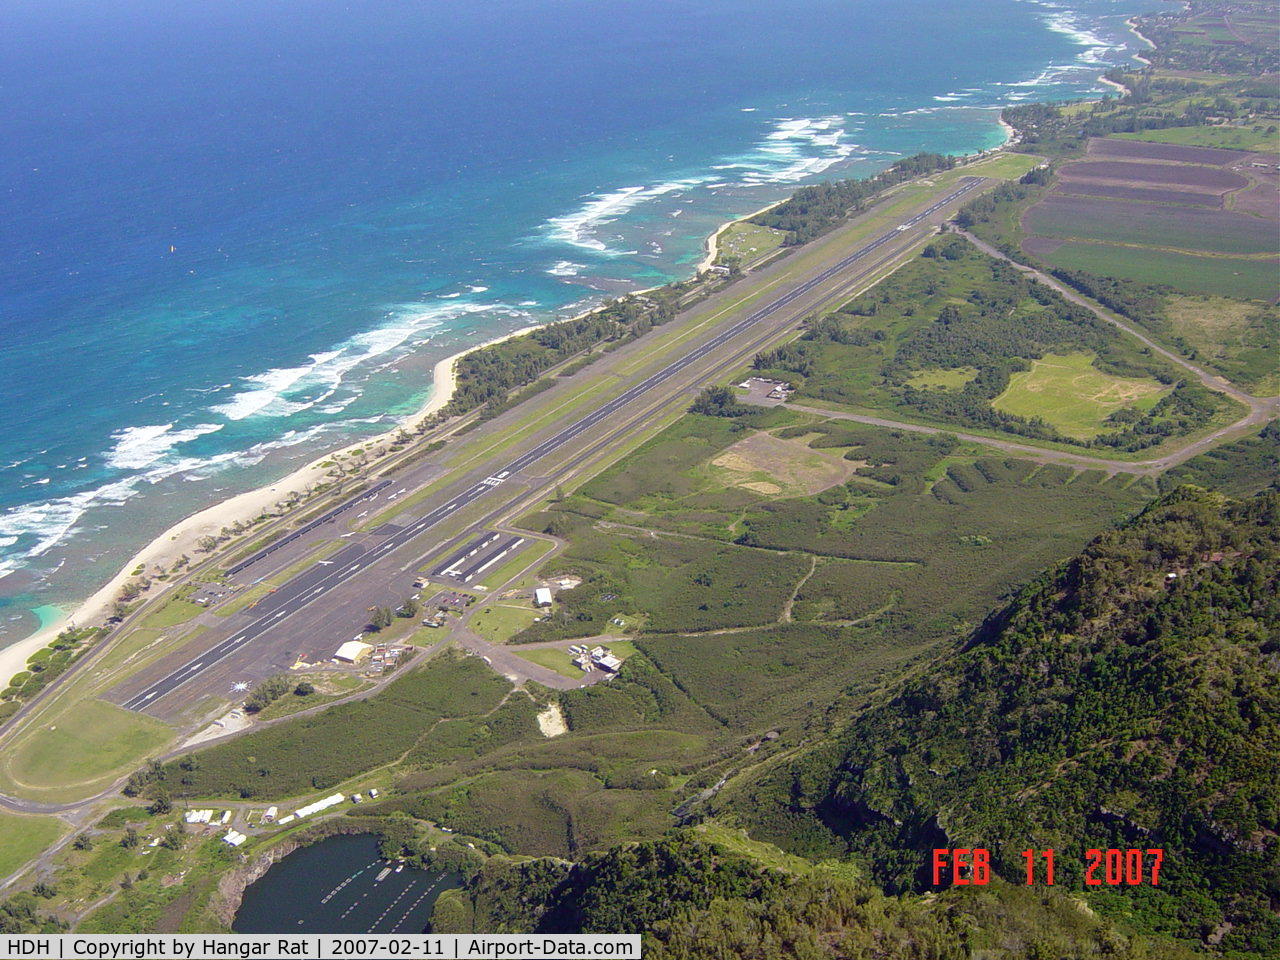 Dillingham Airfield Airport (HDH) - On Oahu's beautiful North Shore. Fun for everyone - gliders, ultralights, skydiving. 